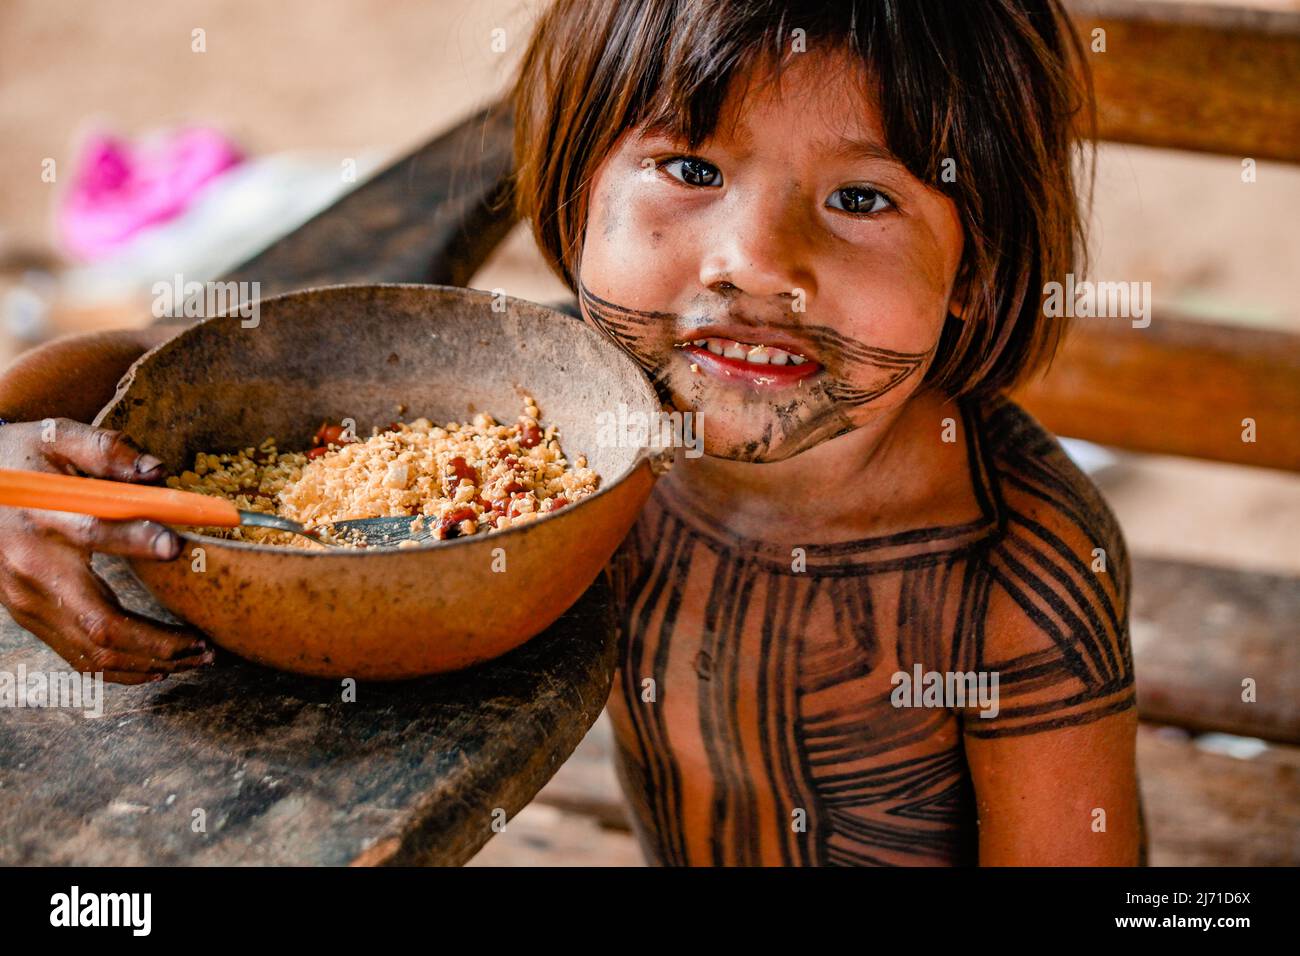 Beautiful indigenous child from teh Asurini indian tribe in the Amazon, eating meal of cassava flour from a wooden bowl. Baixo Amazonas, Brazil 2010. Stock Photo